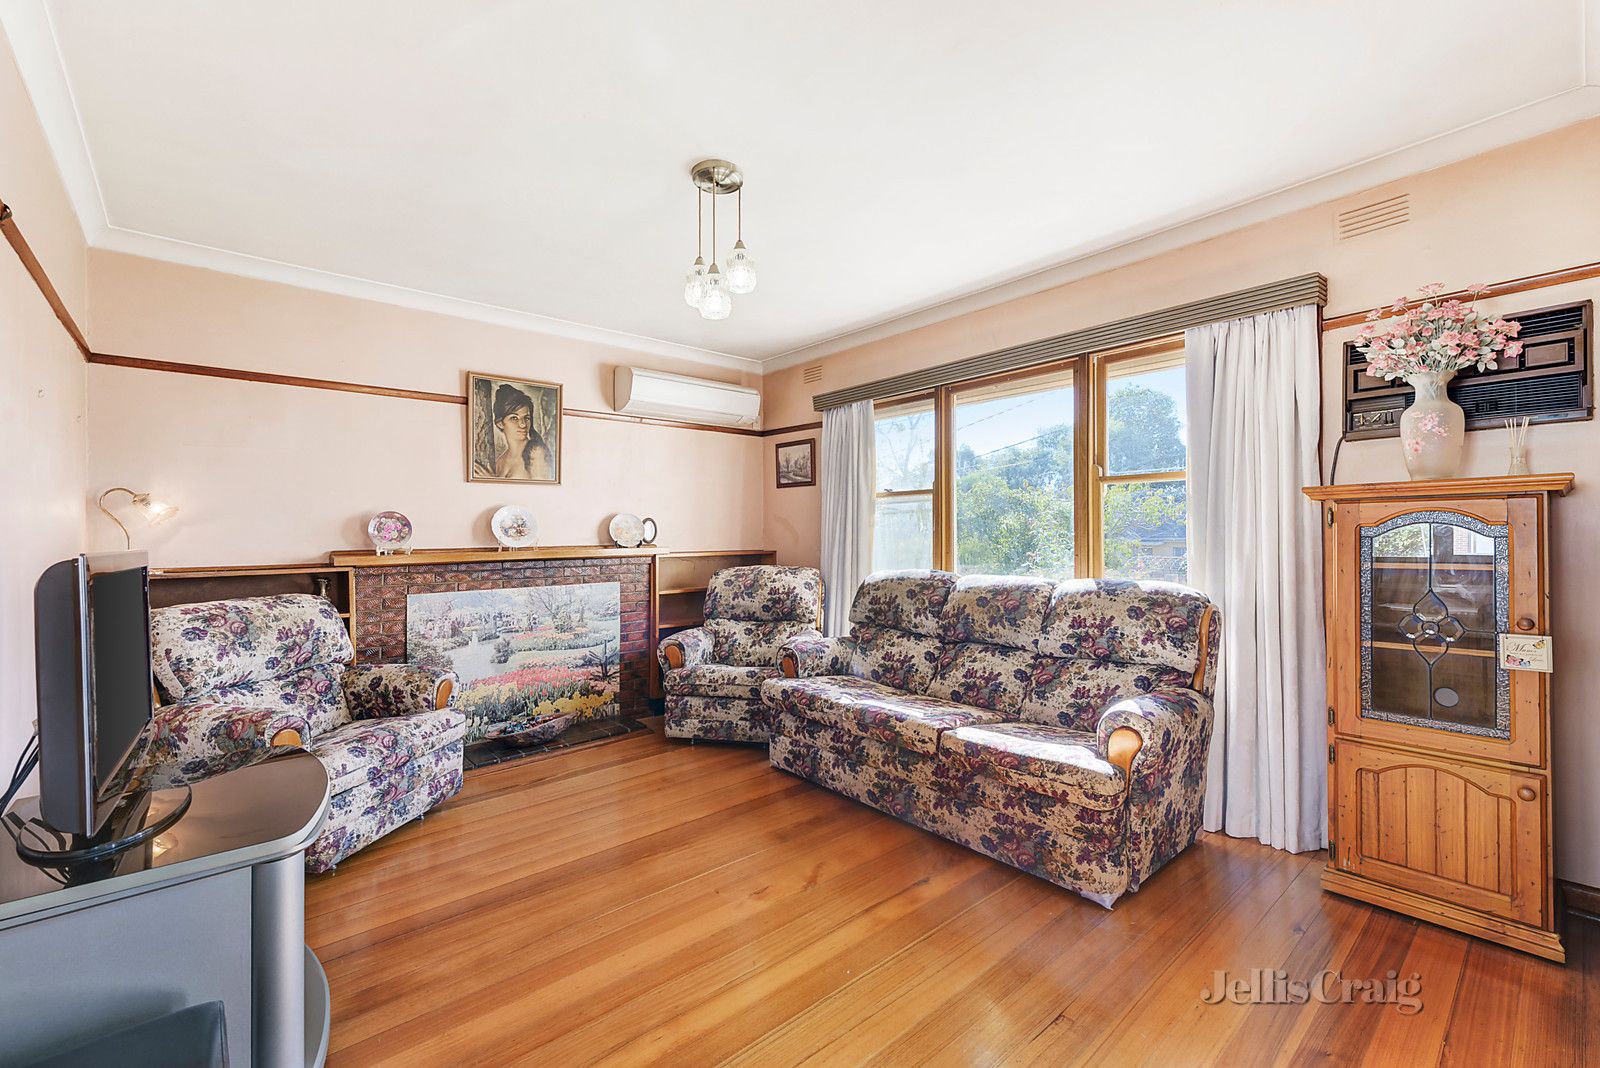 35 Toogoods Rise, Box Hill North VIC 3129, Image 1